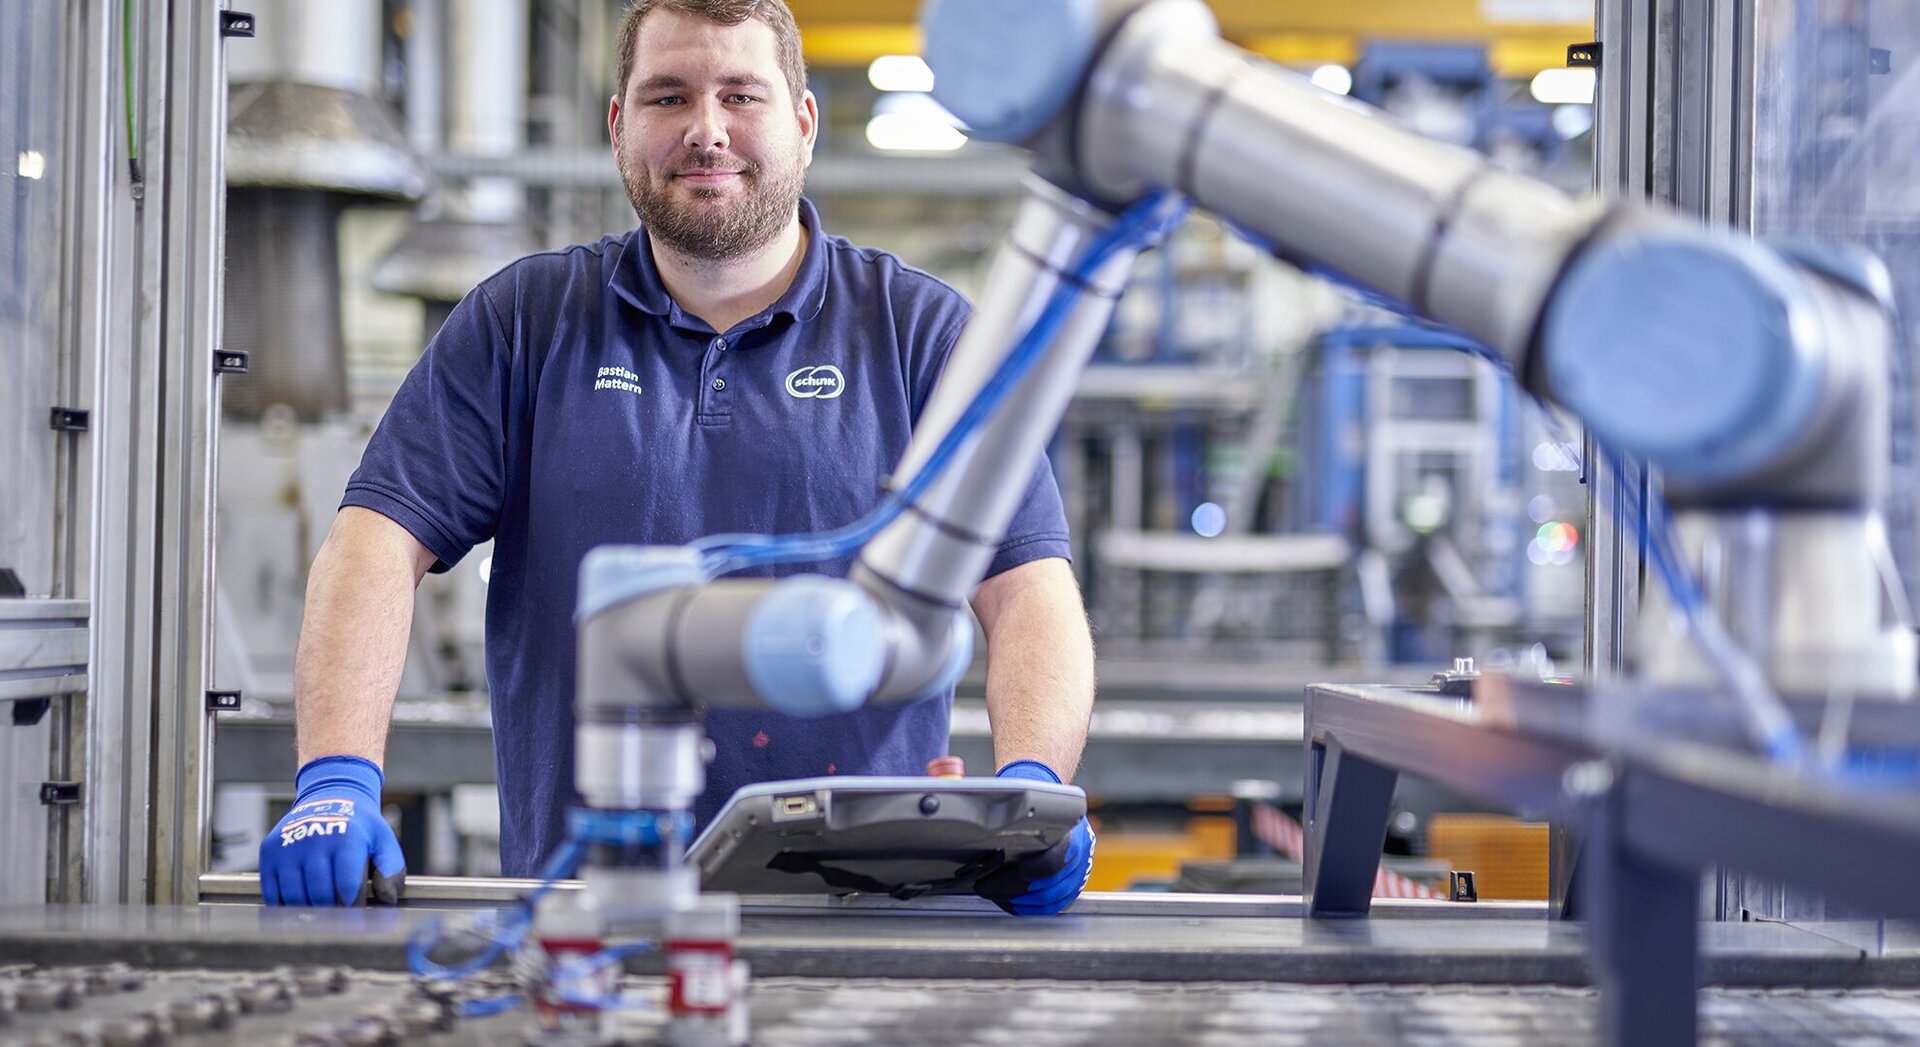  Machine operator at the Schunk Group operates a machine in production